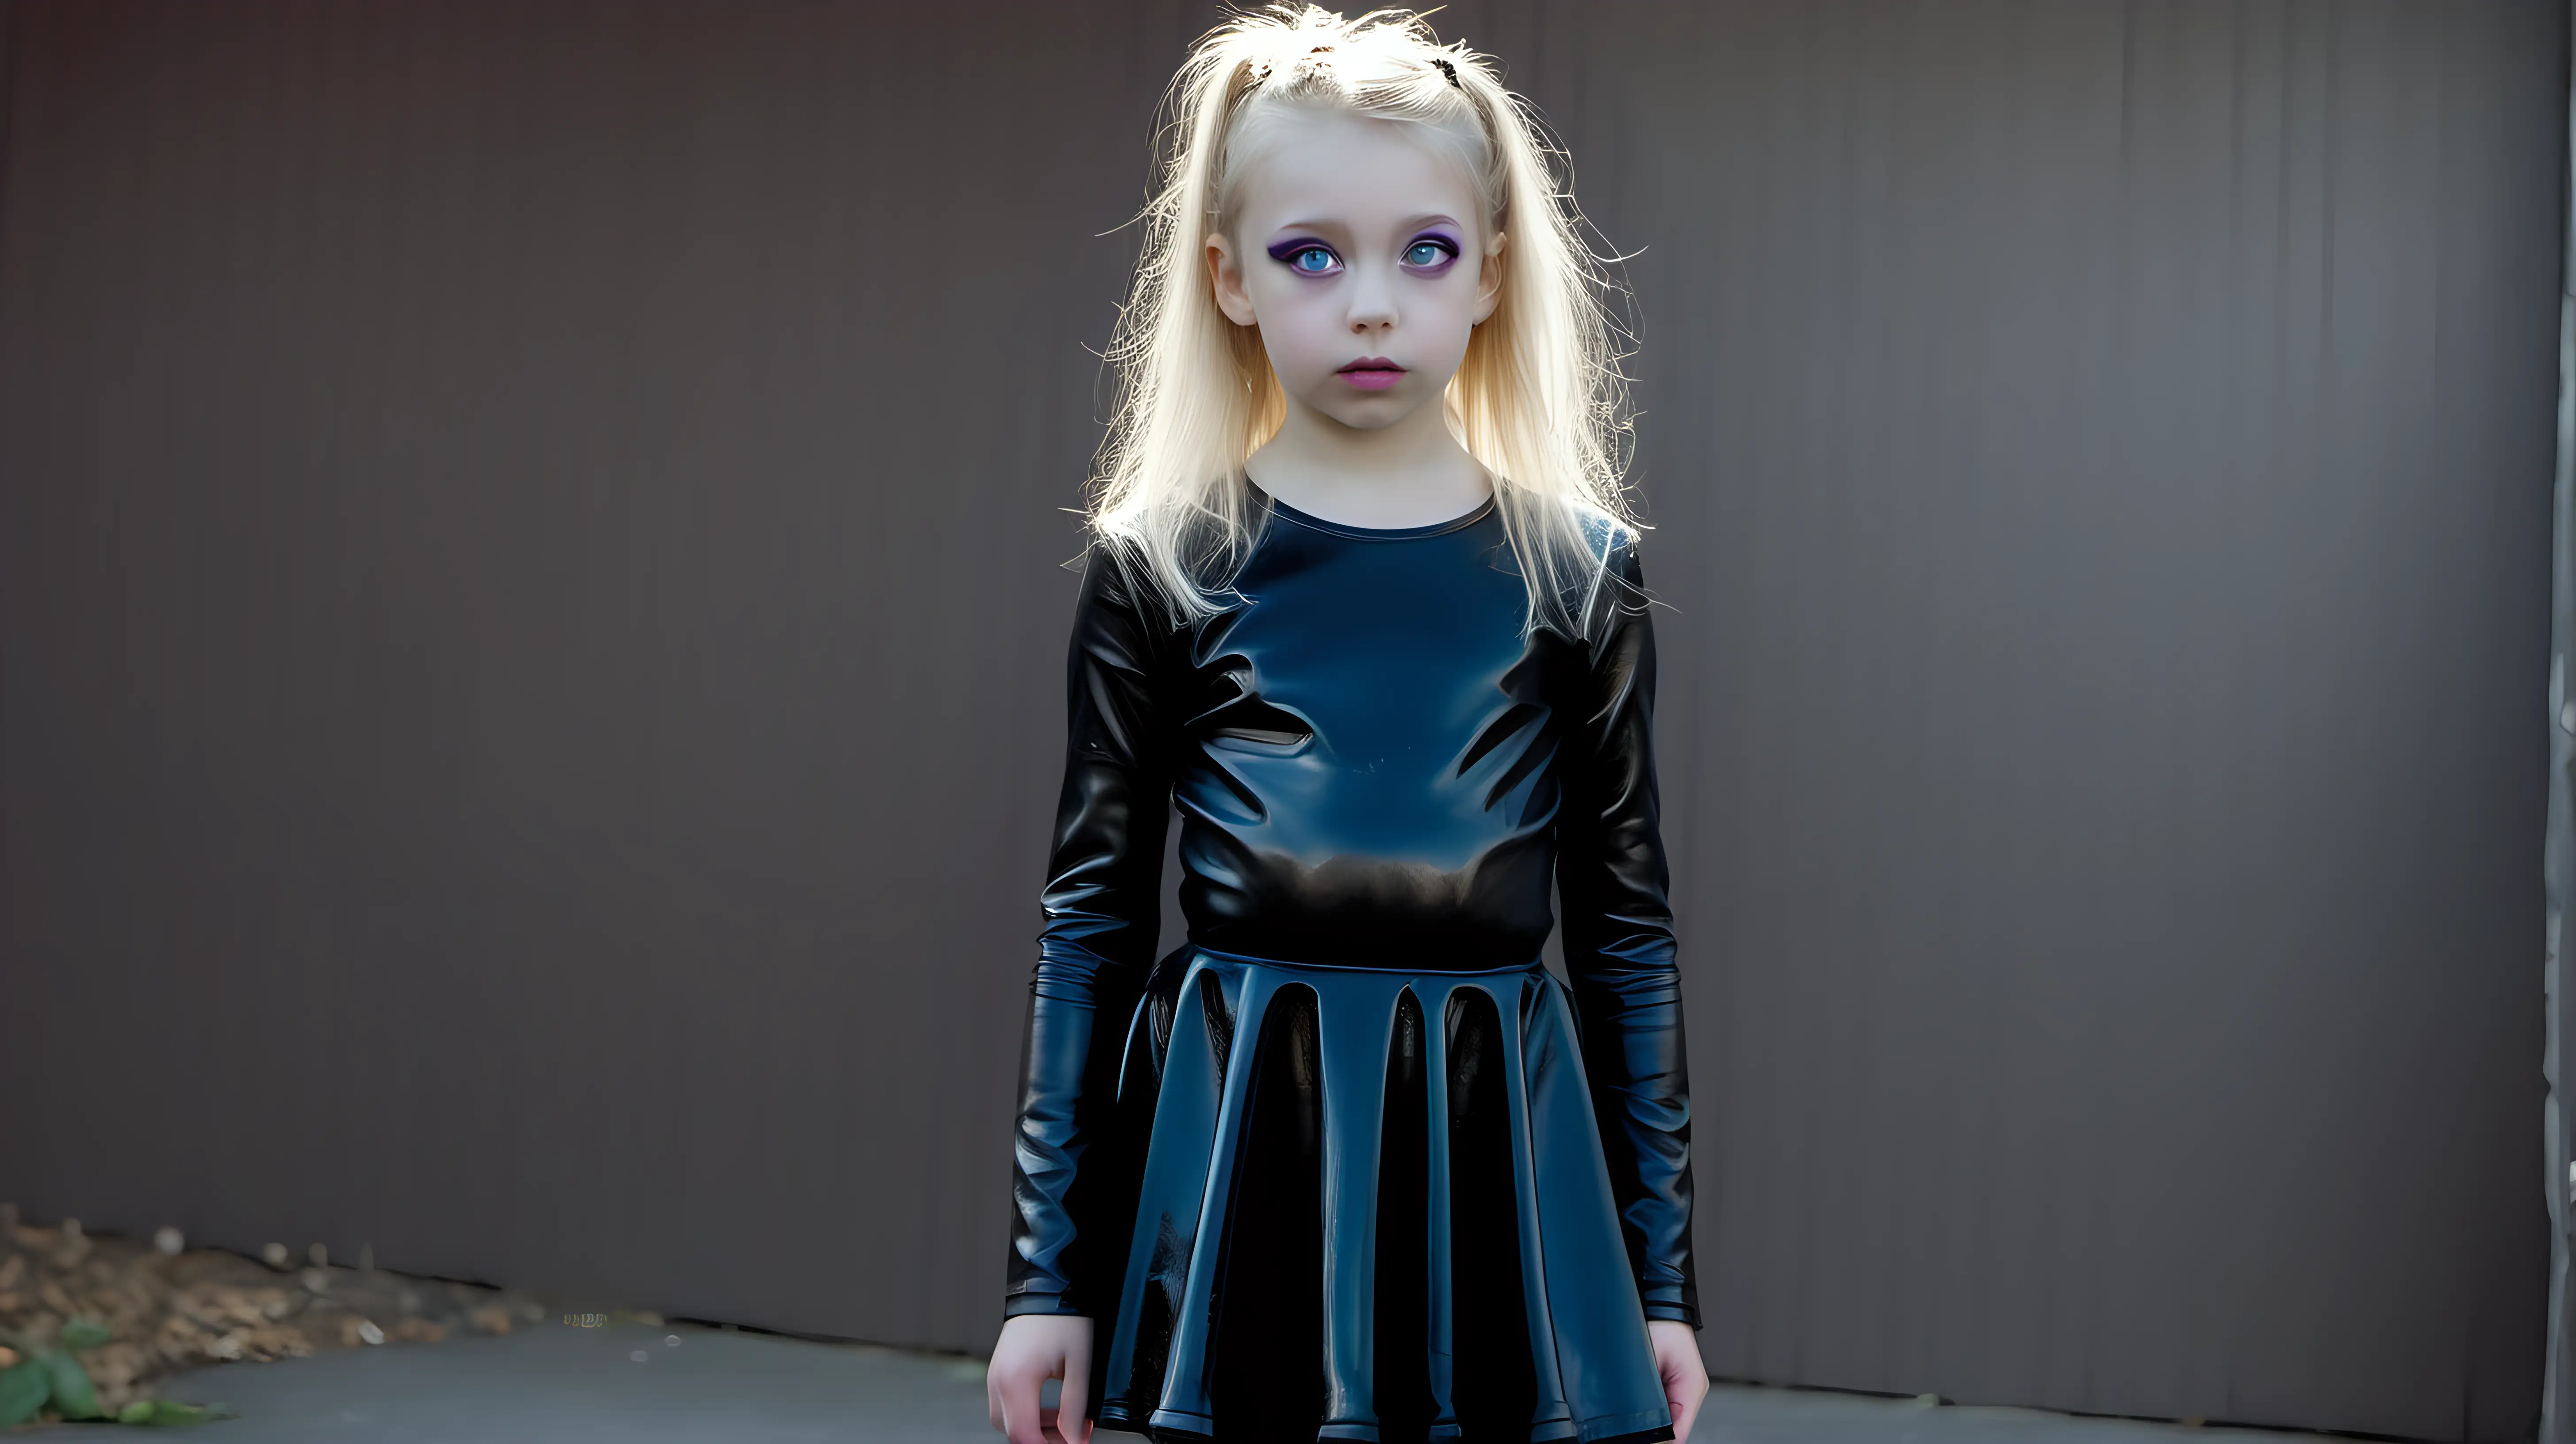 portrait shot , zoom face
 
shot with Nikon AF-S DX NIKKOR 35mm f/1.8G Lens in the street  

portrait of gothic little blond girl 9 years old little girl, wearing costume, black  tights diffused light

blond little girl 9 years old low pony hair clear eyes   wearing cellophane   tights and   skirt with mom  nordic model, 
 diffused light
, elle porte  des collants en   transparents, sa maman 
Goth girl. Neon lights. Wet. Latex dress.  makeup flow, zoom face

porte une robe en cuir en  , flowy black skirtsuit lifting up et 

des hauts talons stiletto, lot of wind in dress and hair

 

on voit des passants derrières elles  

 
 with mom  wearing   leather dress,   black tights, 
  [Highly Detailed]     pantyhose
with high heels stiletto stand up ,  
look sad, make-up flow
suntanned skin, natural skin texture, (highly detailed skin:1.1), 

textured skin, (oiled shiny skin:0.5), 
 ,intricate skin details, visible skin detail, (detailed skin 

texture:1.1), mascara, (skin pores:1.1),  , skin fuzz, 

(blush:0.5), (goosebumps:0.5), translucent 
skin, (minor skin imperfections:1.2),    
(round iris:1.1), light reflections in her eye, visible cornea, highly detailed iris, remarkable detailed pupils 
--v 6
